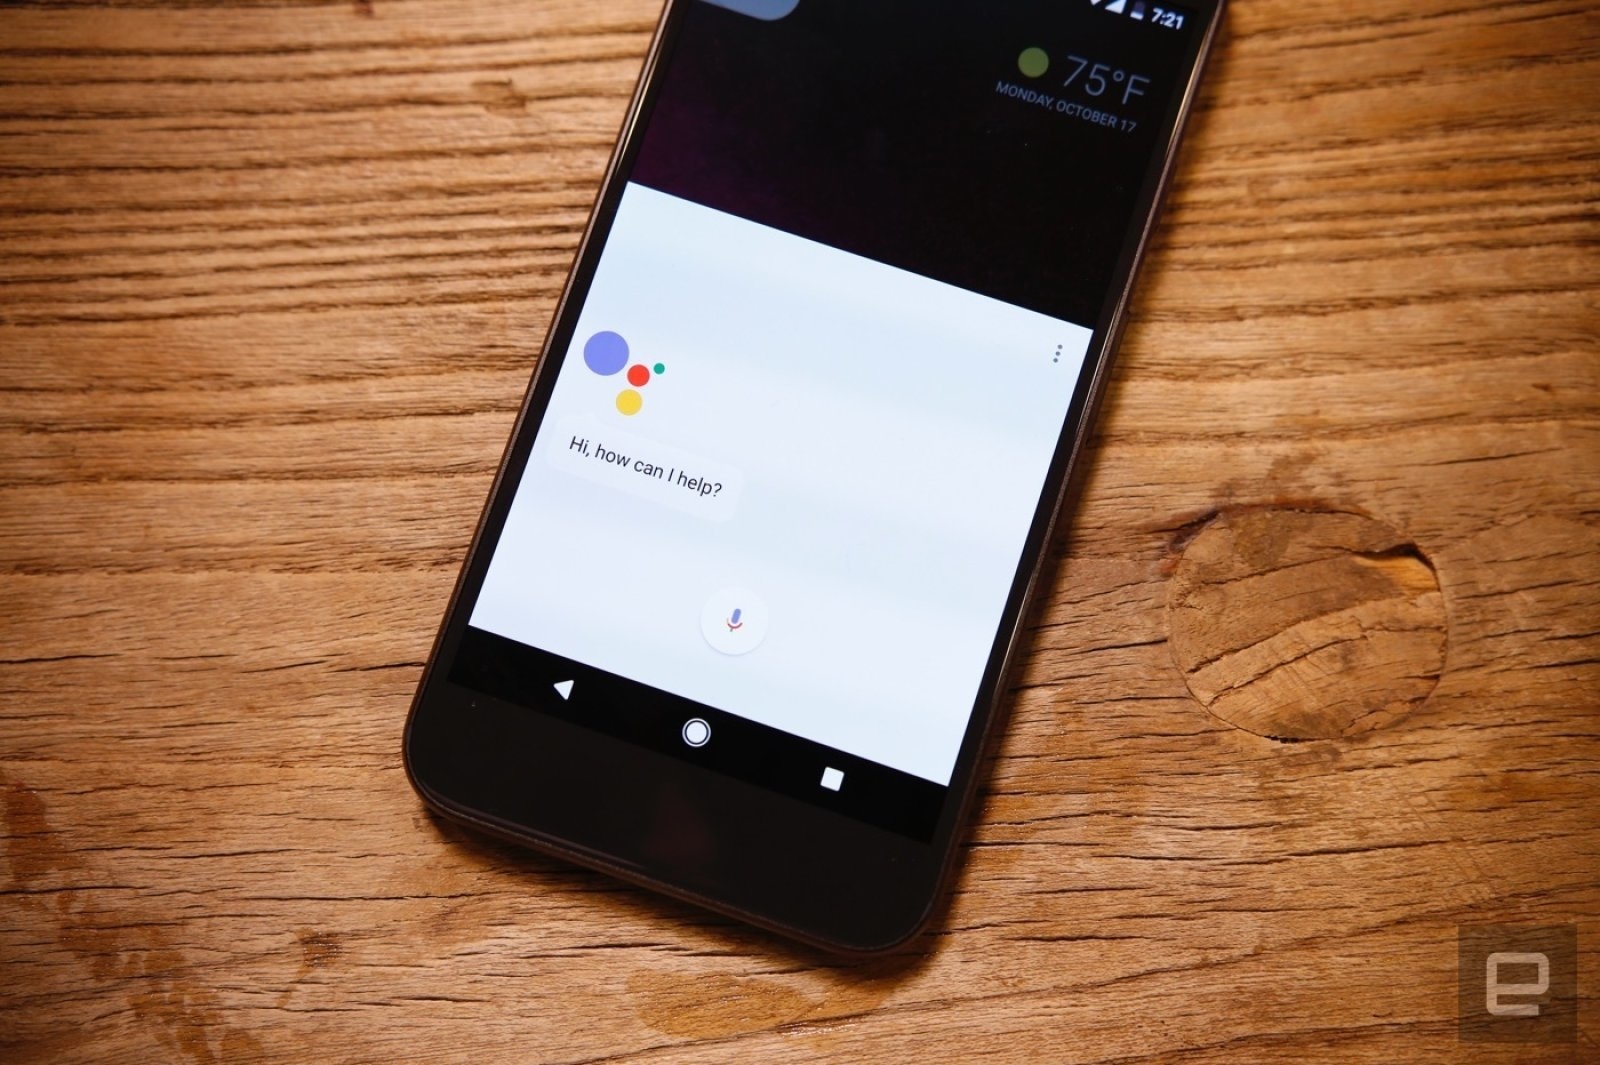 Google Assistant for Android now supports Spanish and Italian